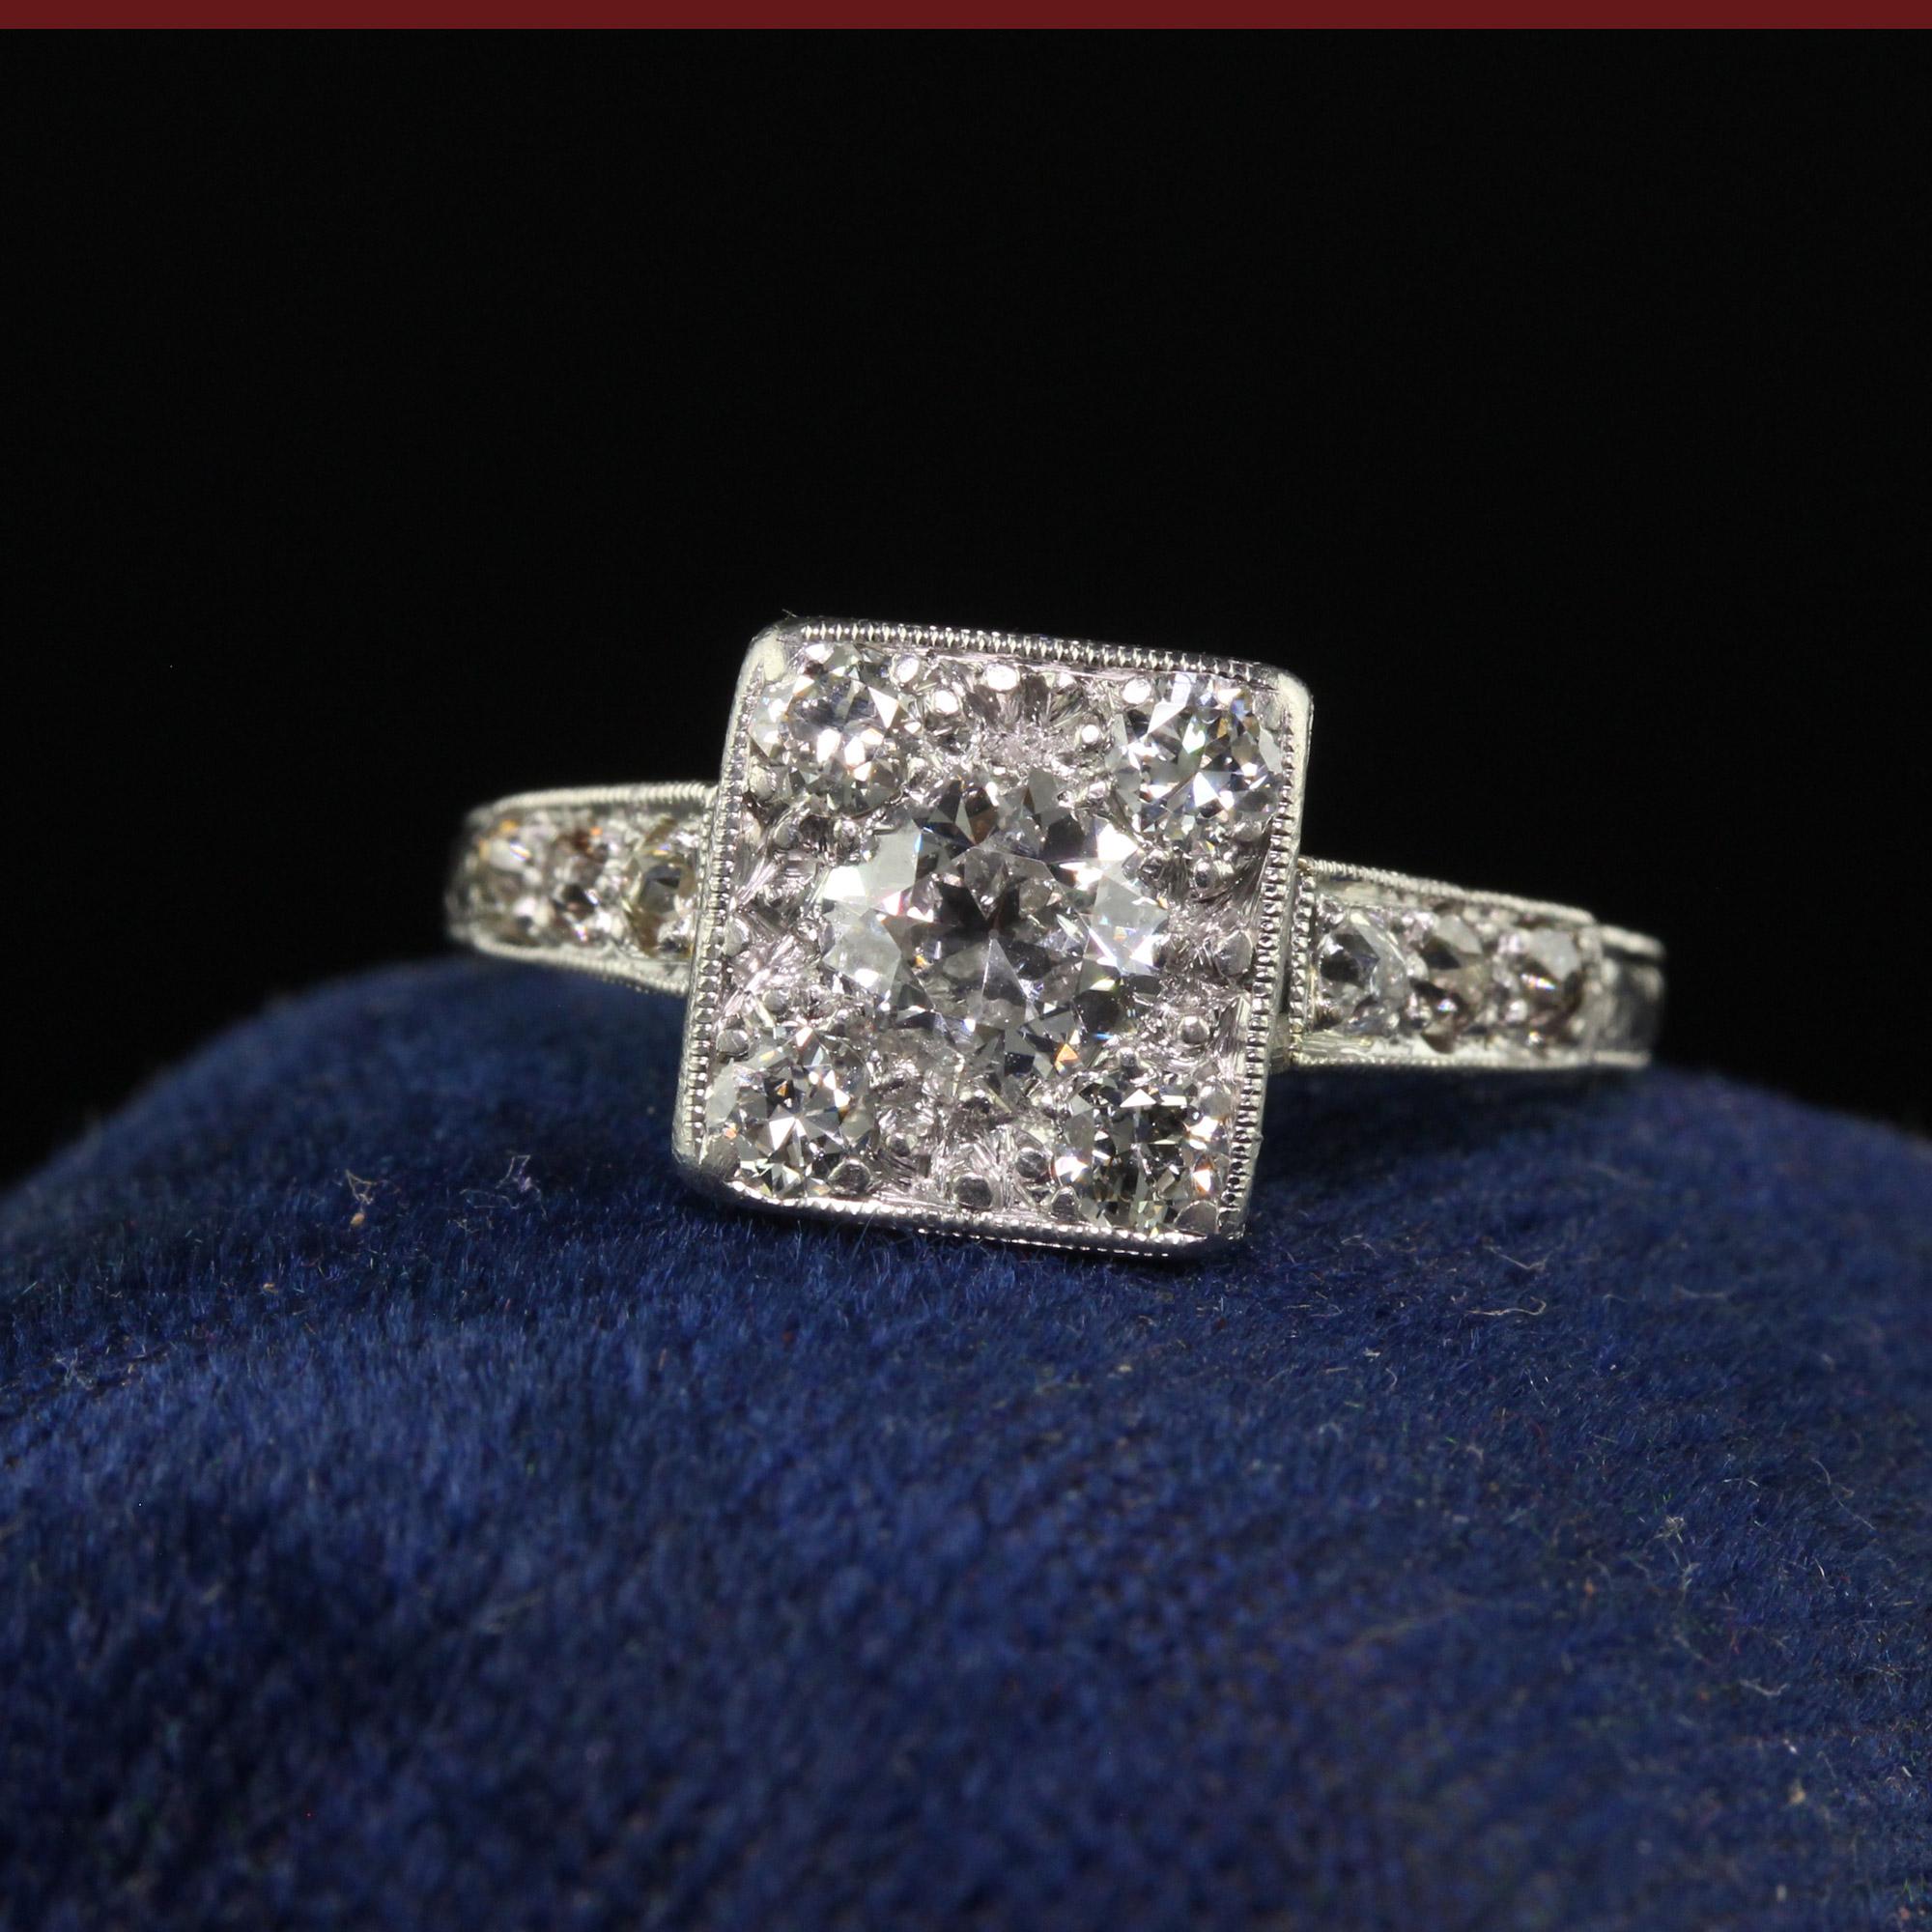 Beautiful Antique Art Deco Platinum Old European Cut Diamond Cluster Engagement Ring. This incredible engagement ring is crafted in platinum. The center holds an old European cut diamond that has four old cut diamonds on each corner of the stone. Th